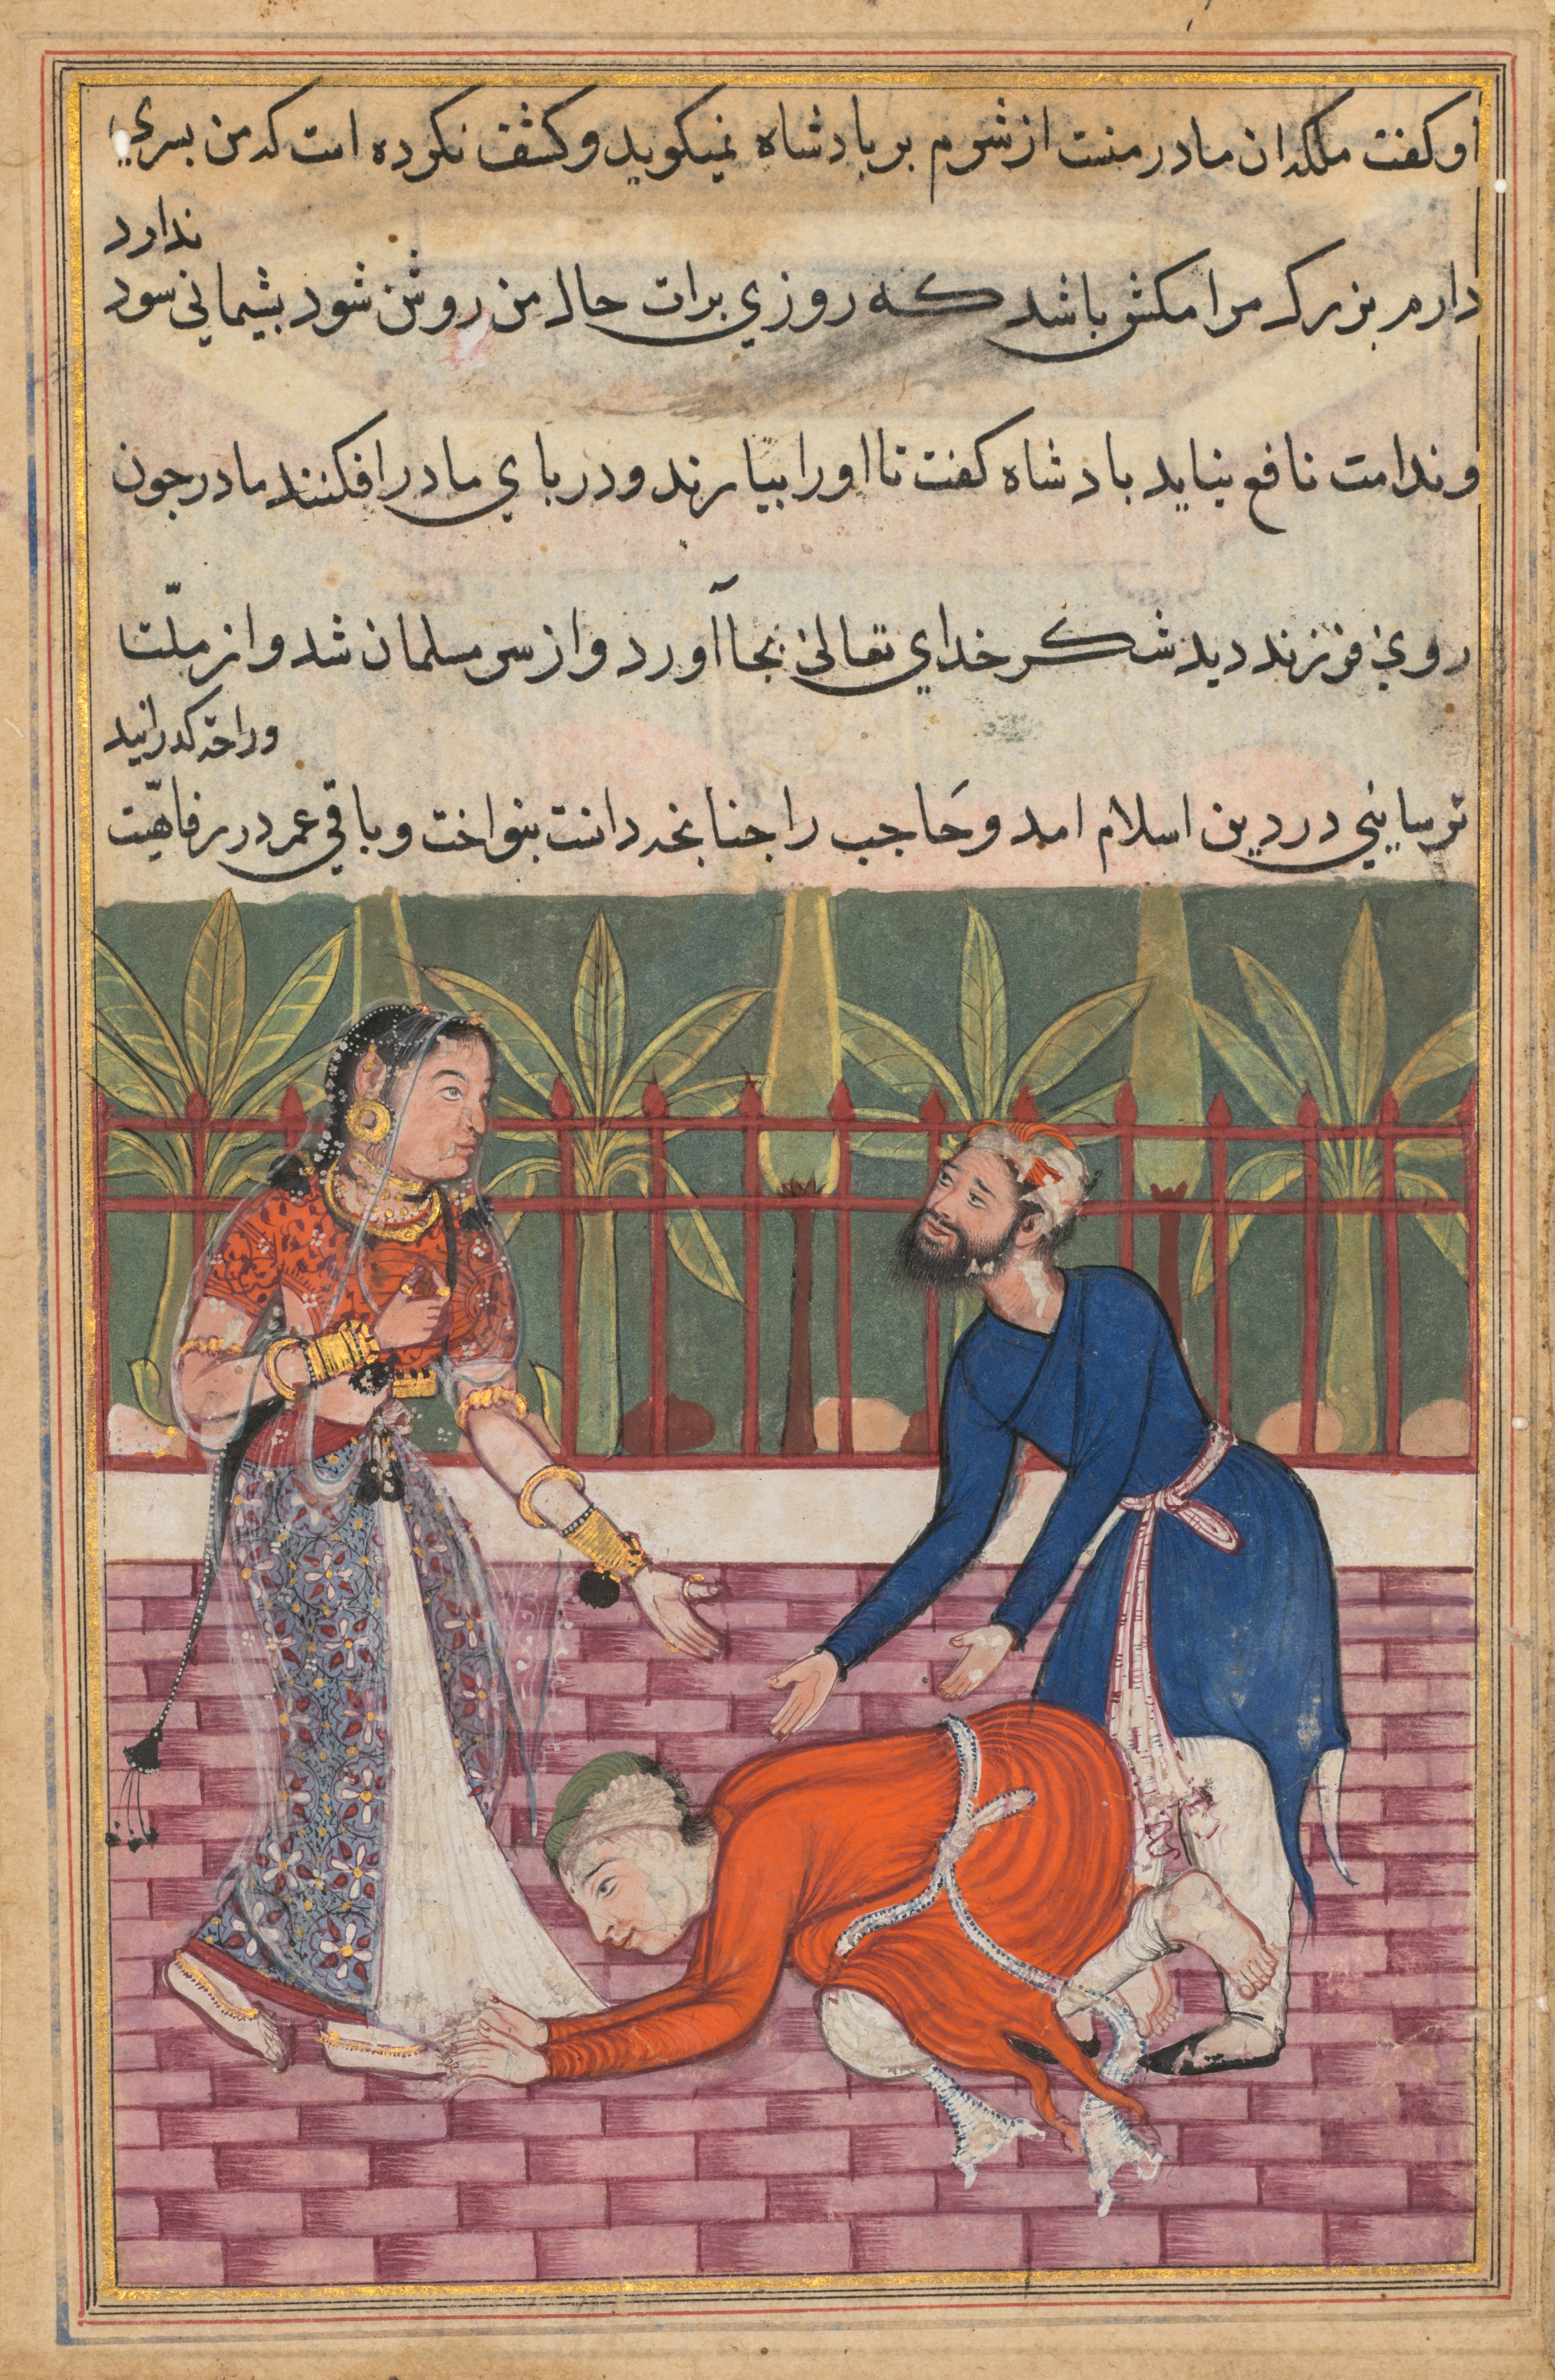 The guard restores the son who falls at his mother’s feet, from a Tuti-nama (Tales of a Parrot): Fiftieth Night